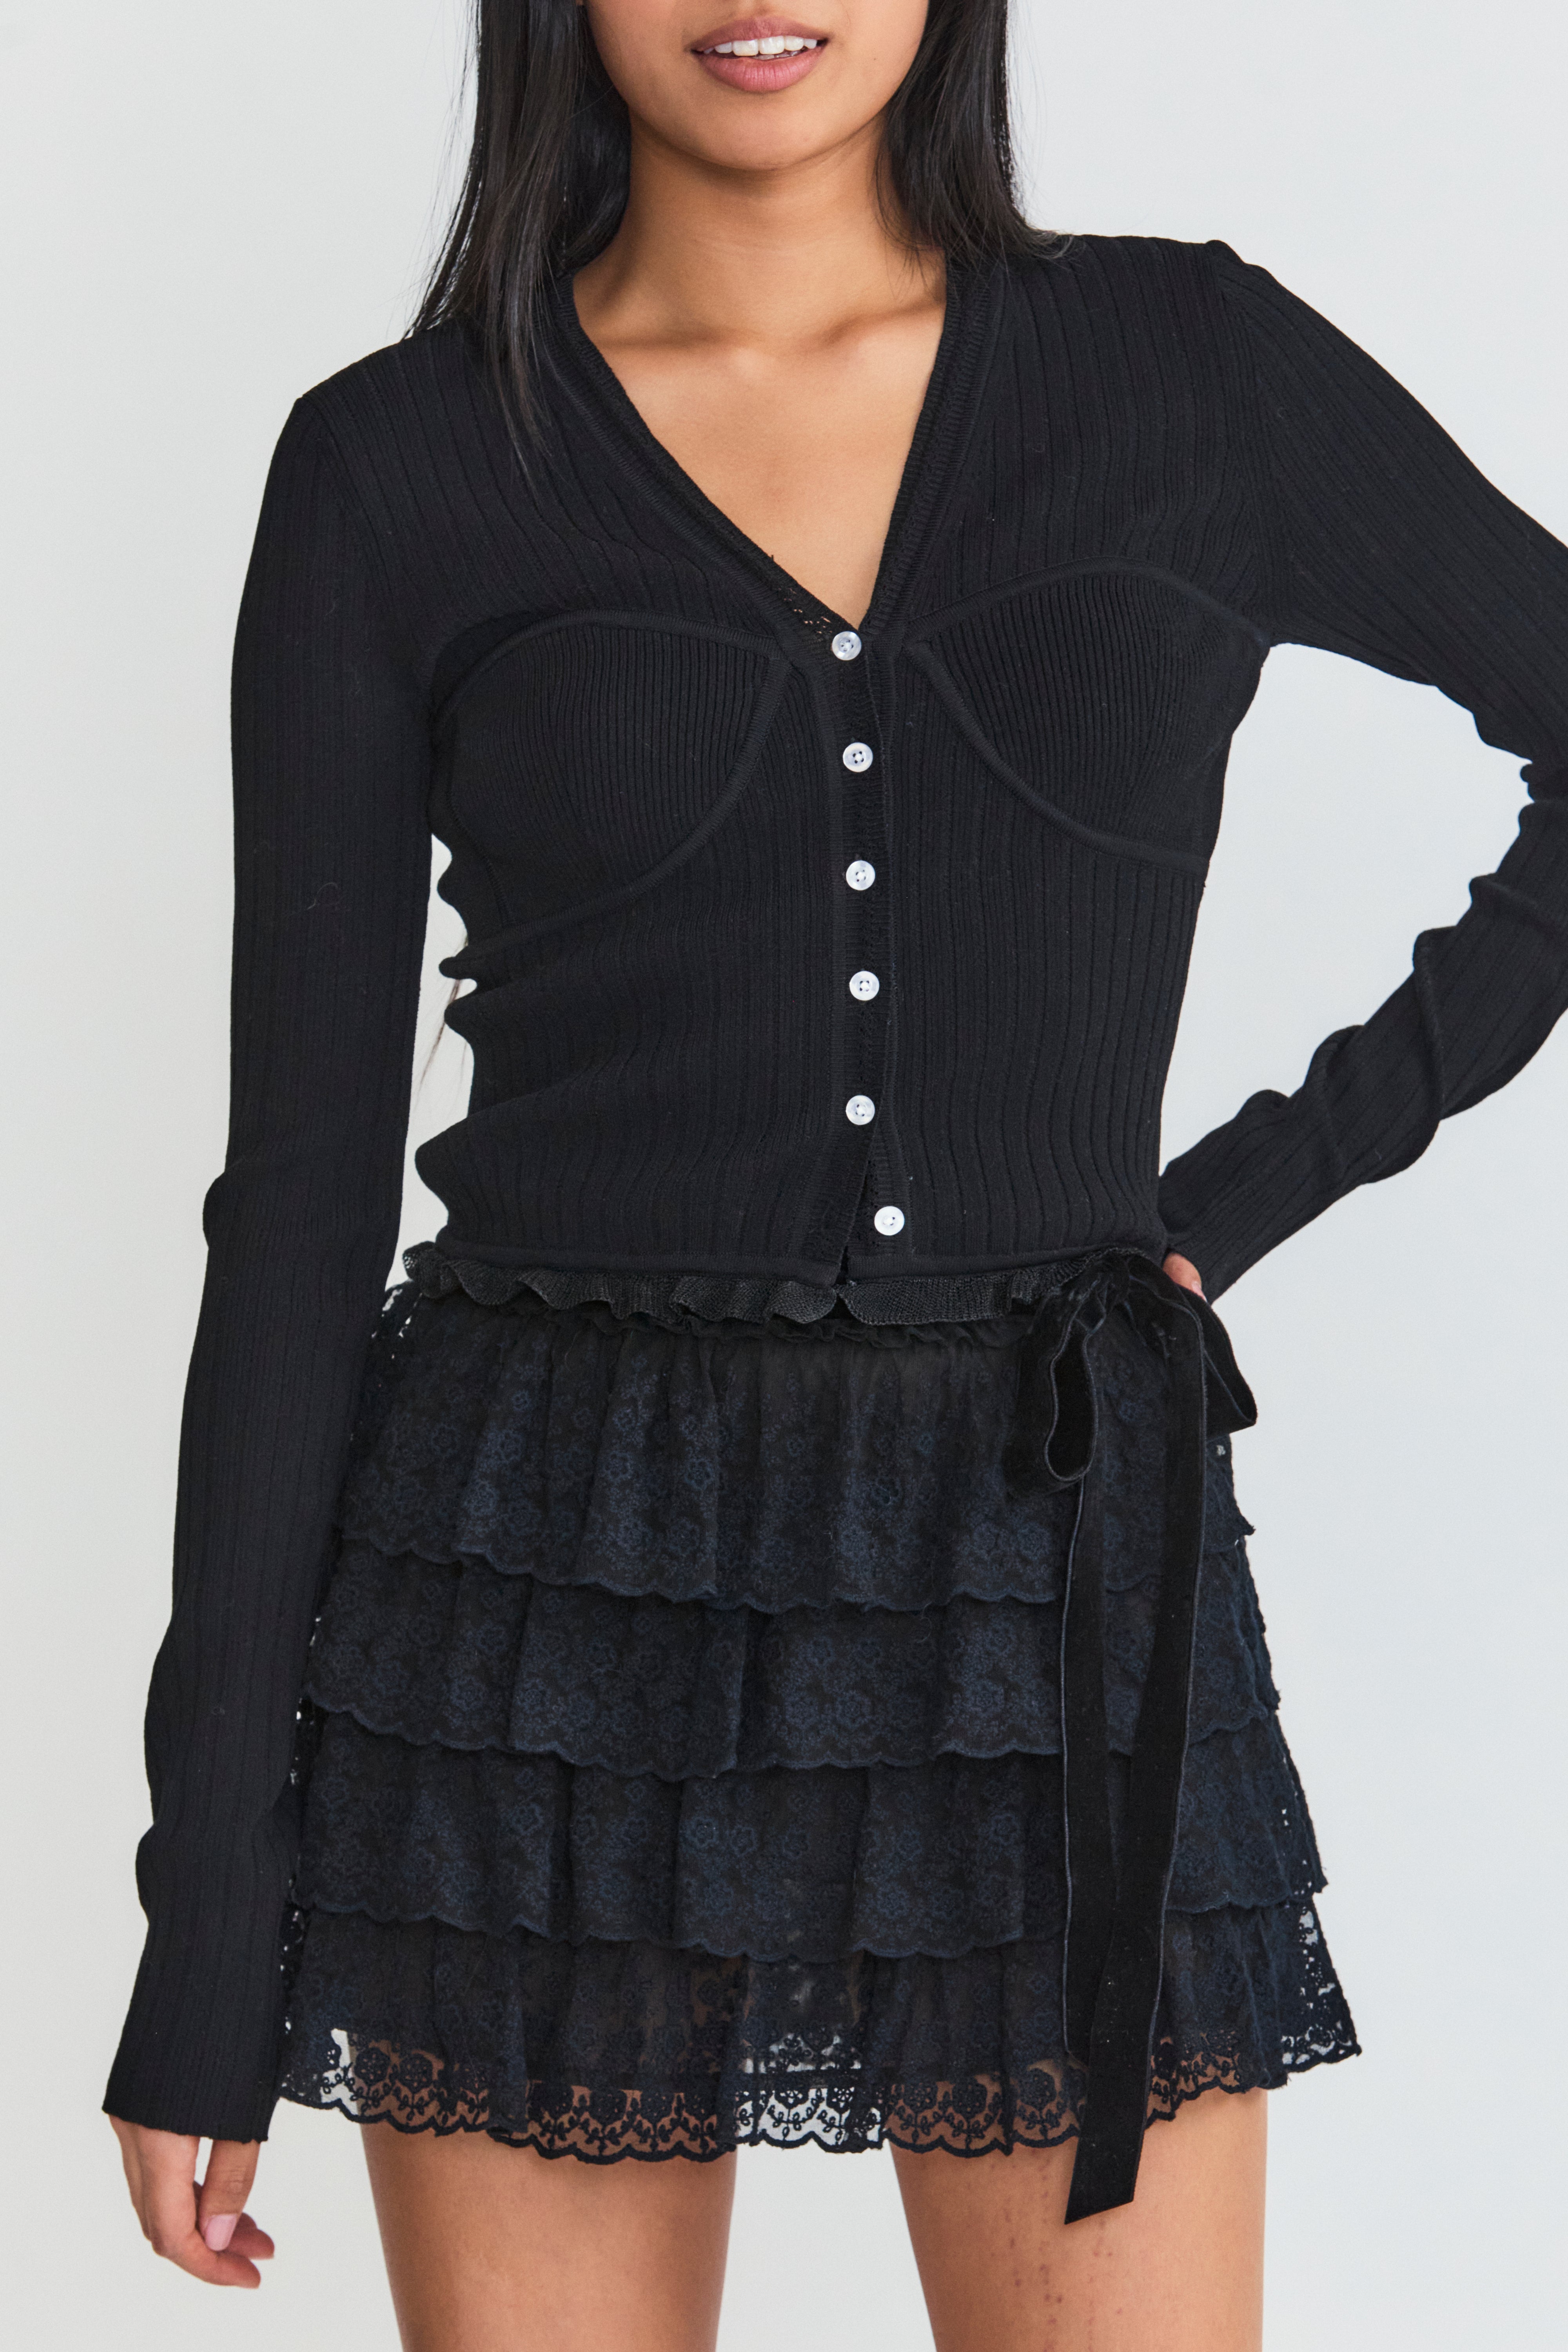 Model wearing black v-neck cardigan with ruffle detail at hem and button up closure.